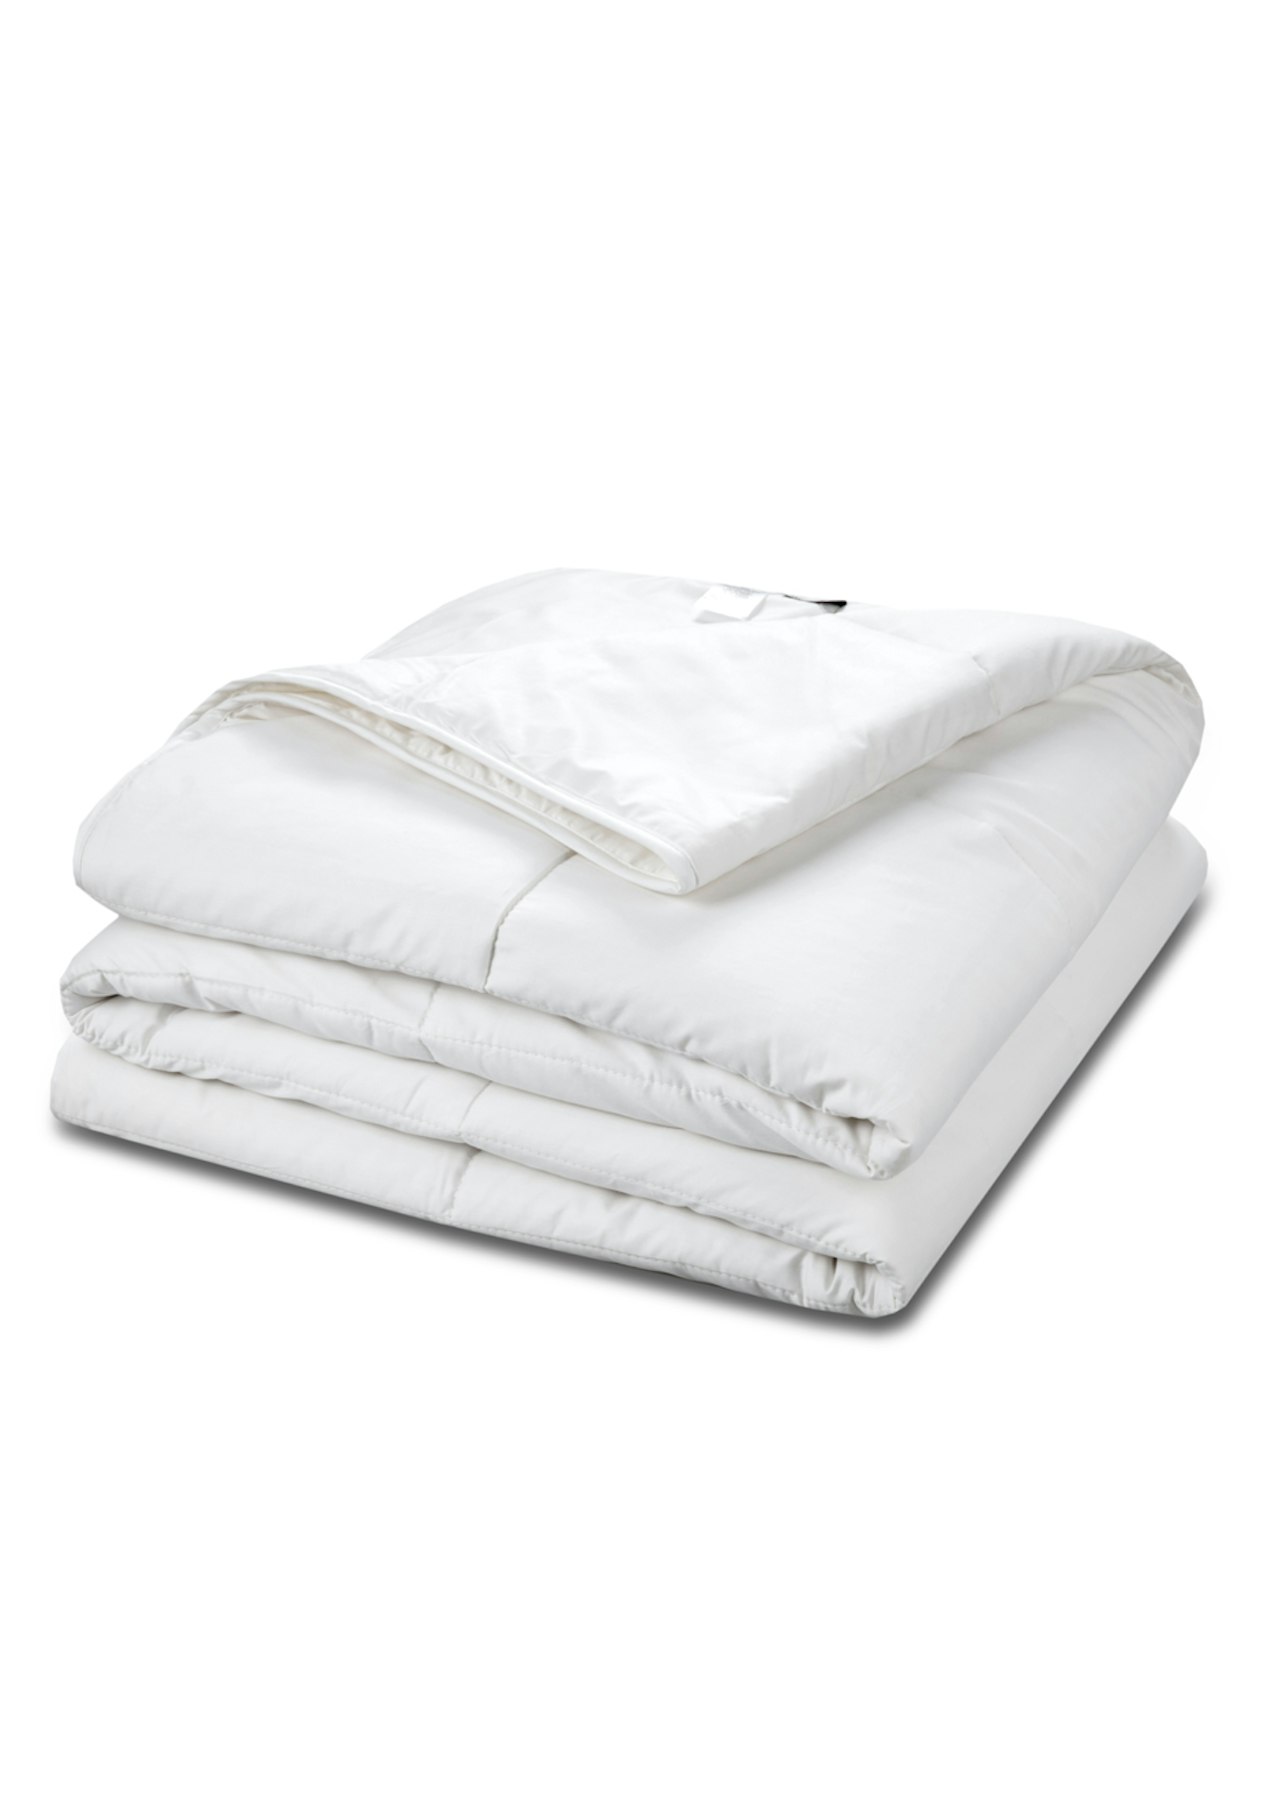 Natural Home Winter Wool Quilt 500gsm Single Bed White